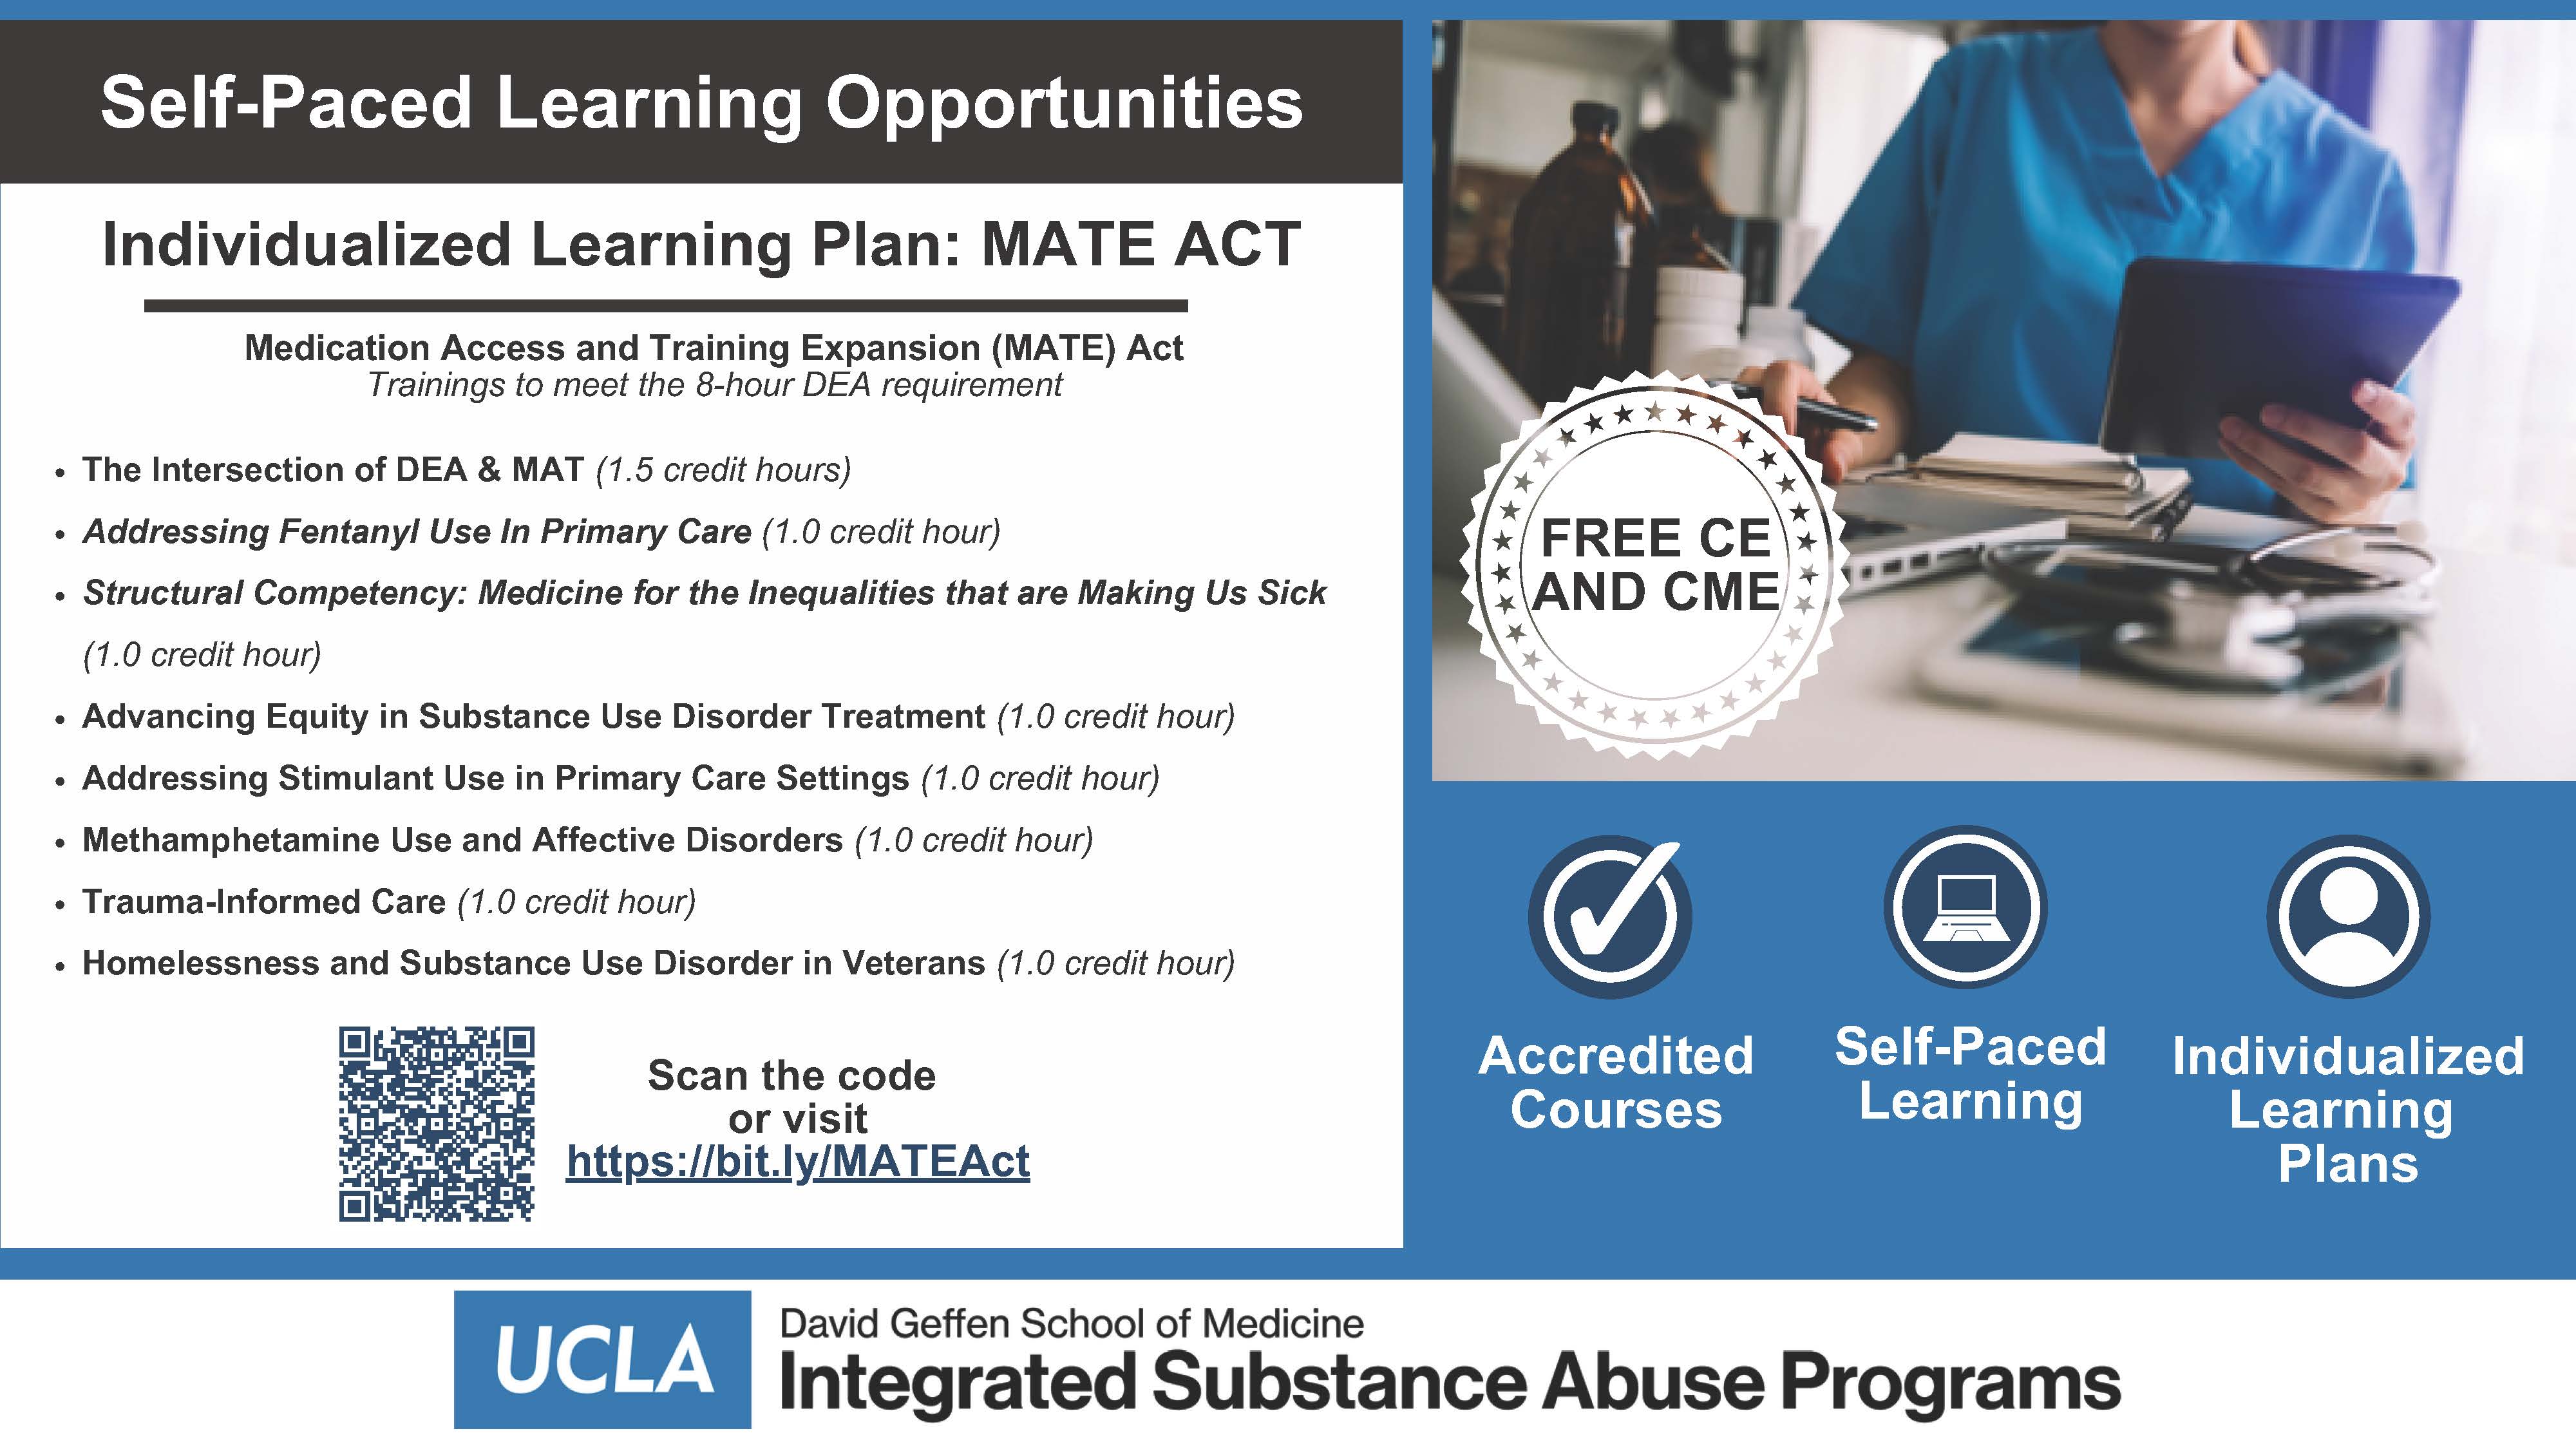 Flyer for self-paced learning opportunities